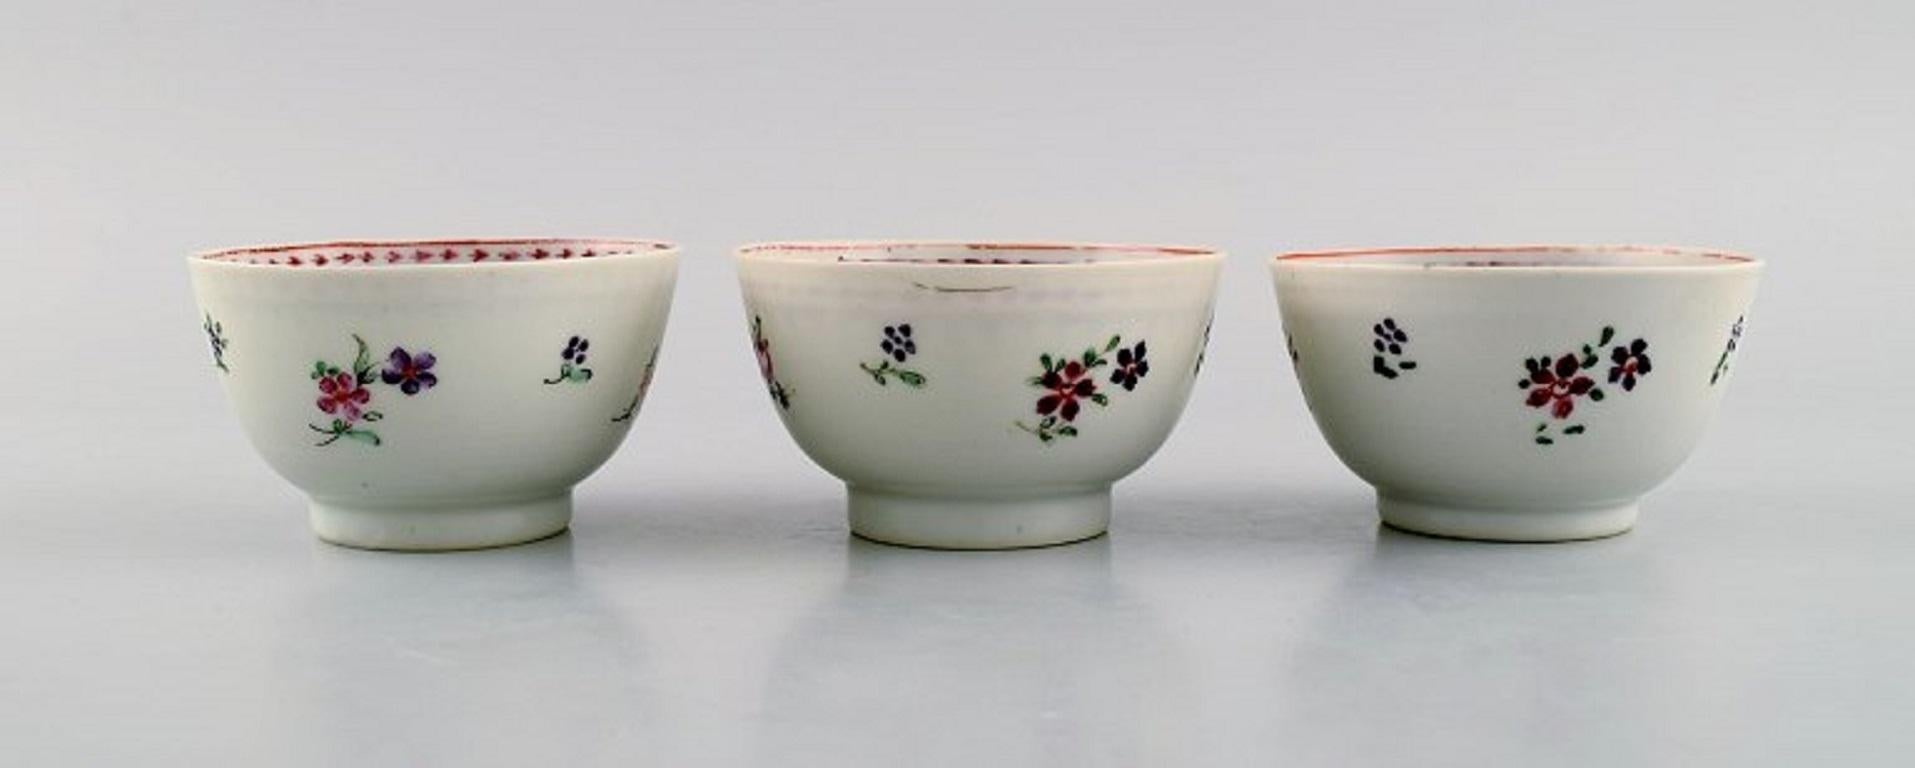 18th Century and Earlier Three Antique Chinese Teacups in Hand-Painted Porcelain, Qian Long '1736-1795' For Sale